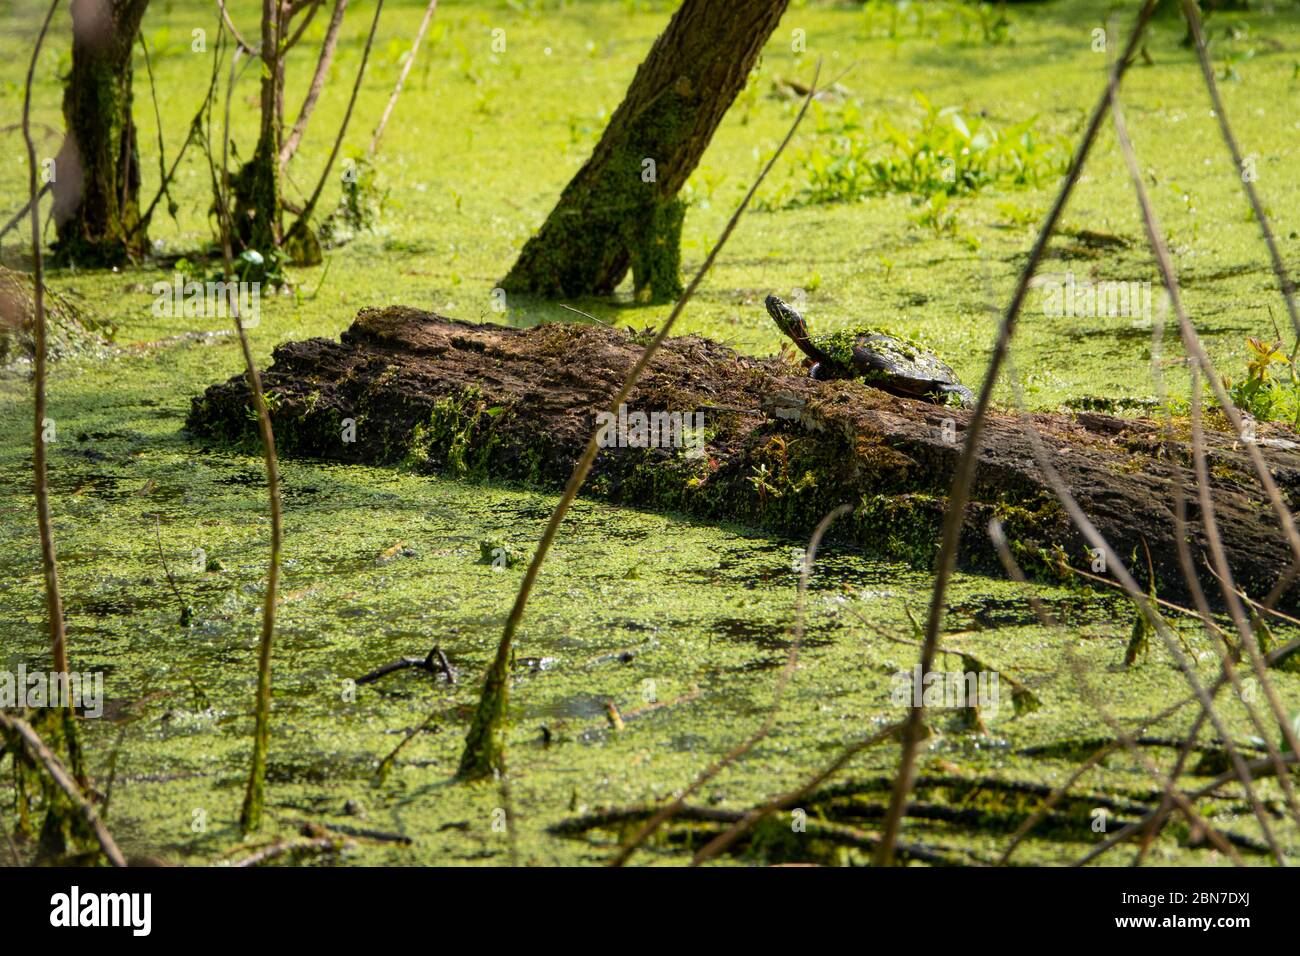 USA Maryland Poolesville McKee Beshers Wildlife Management Area Turtles on a log covered in duckweed Stock Photo